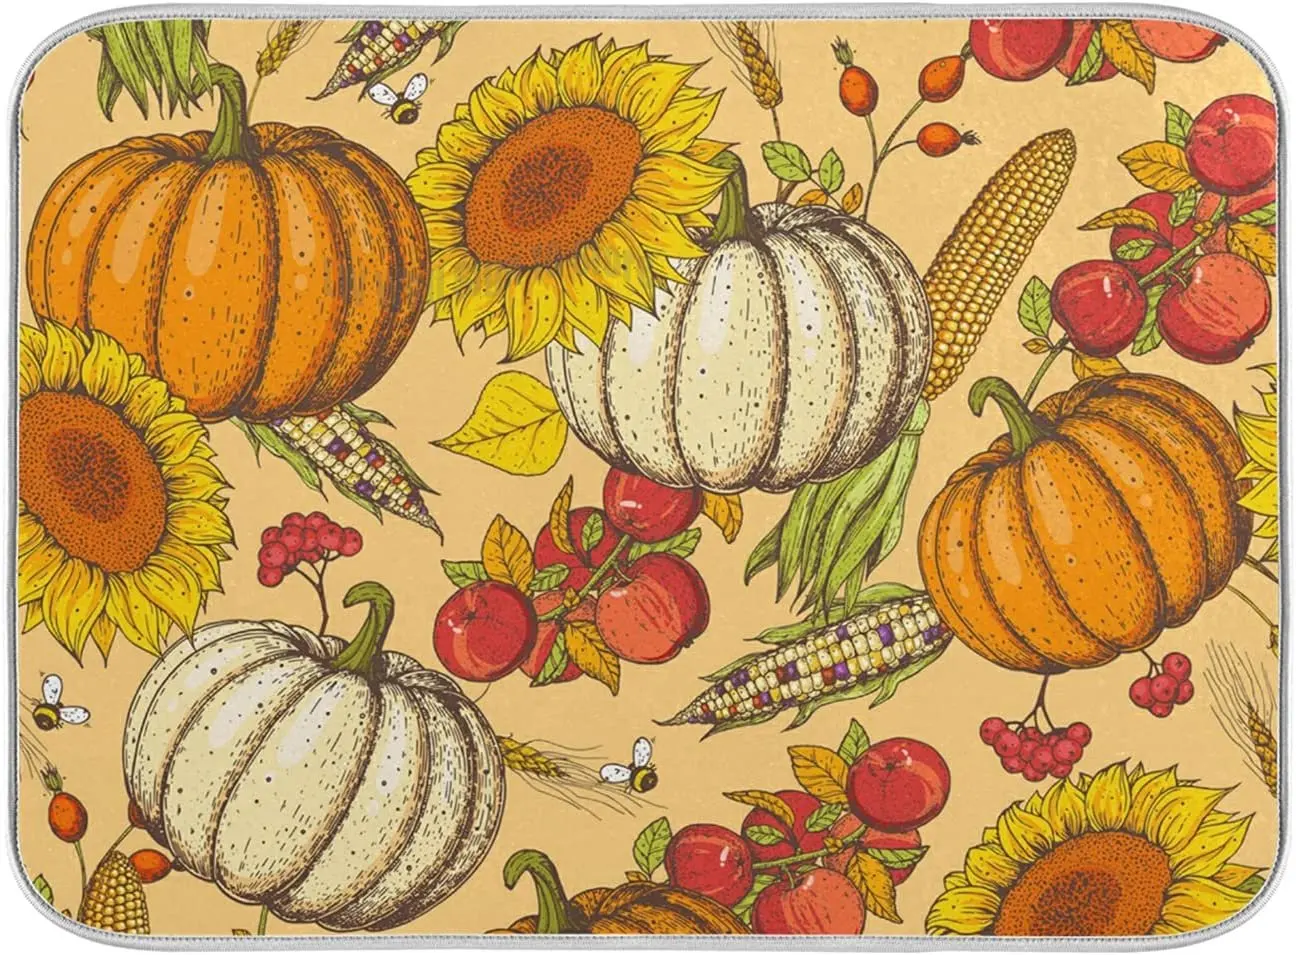 

Absorbent Dish Drying Mat Pumpkins 16x18 inch, Kitchen Counter Dish Mats for Dishes